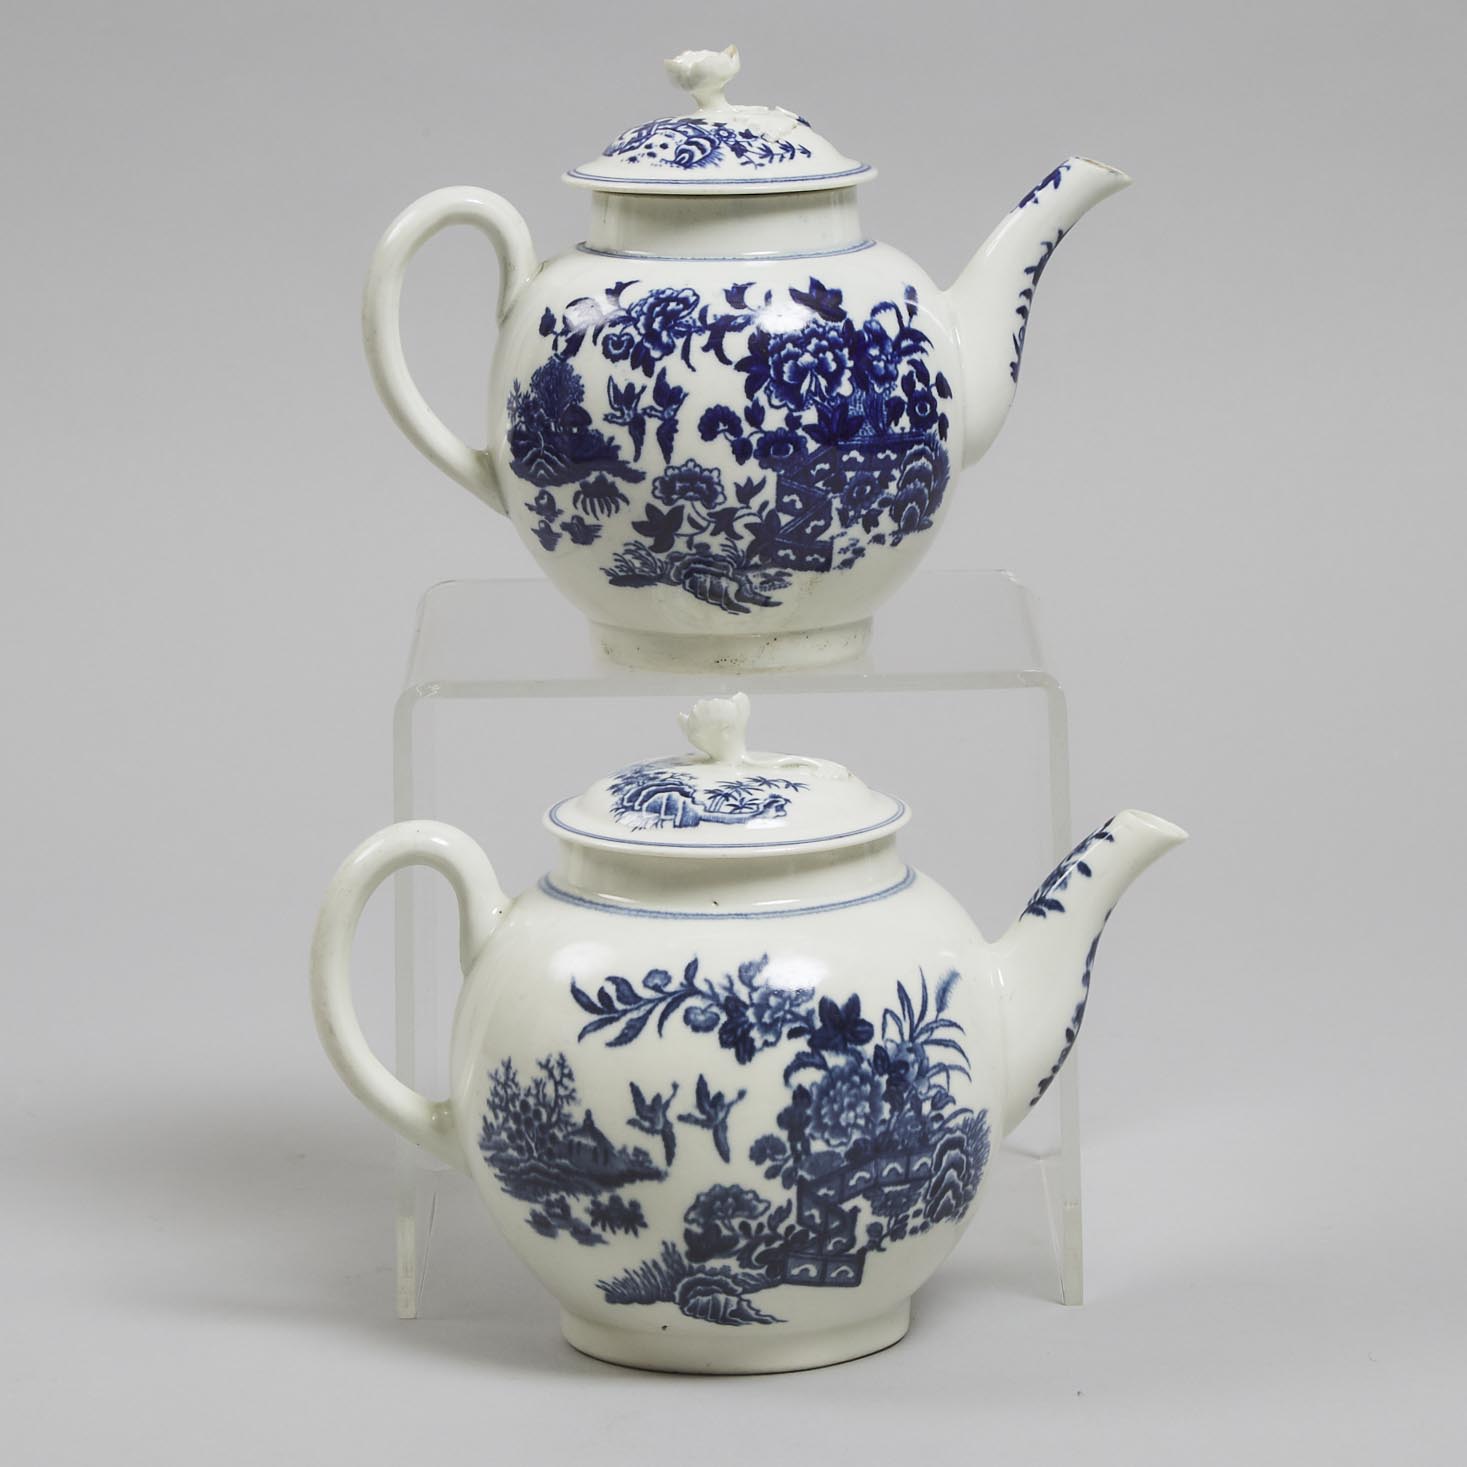 Two Worcester Blue Printed 'Fence' Pattern Teapots, c.1775